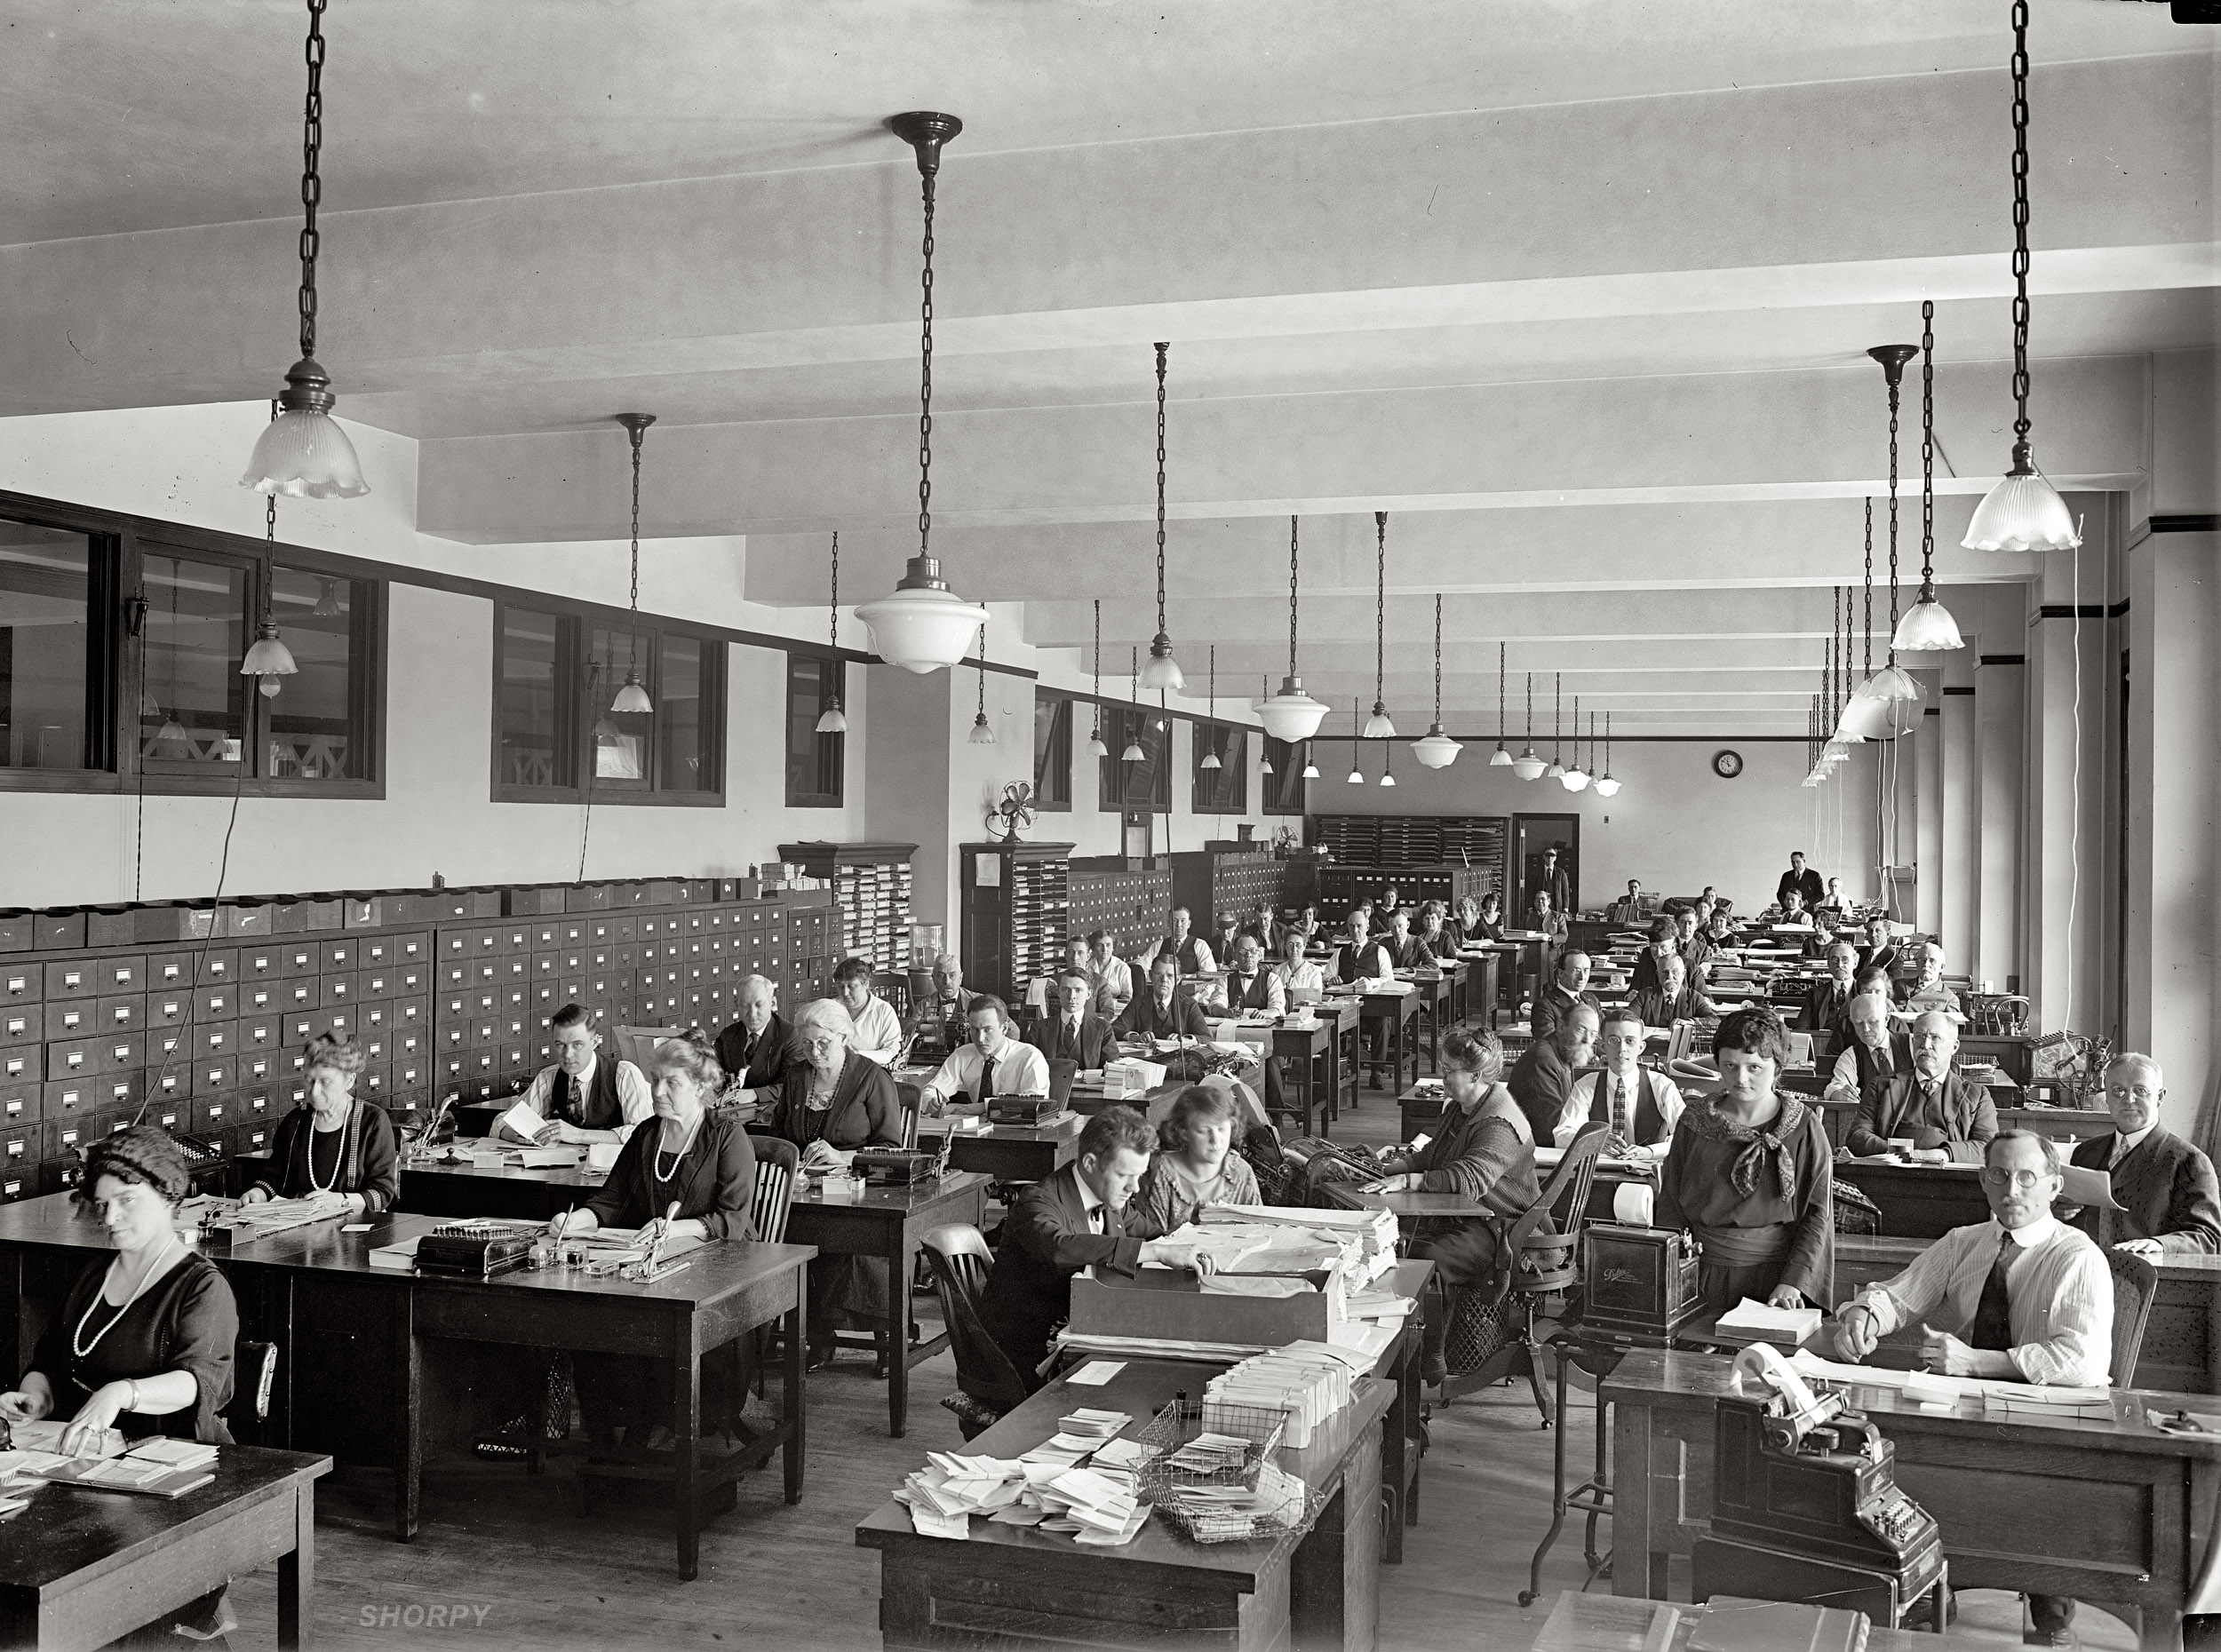 Washington, 1923. "Stamp Division, Post Office." View full size. National Photo Company Collection glass negative, Library of Congress. Everyone look busy!